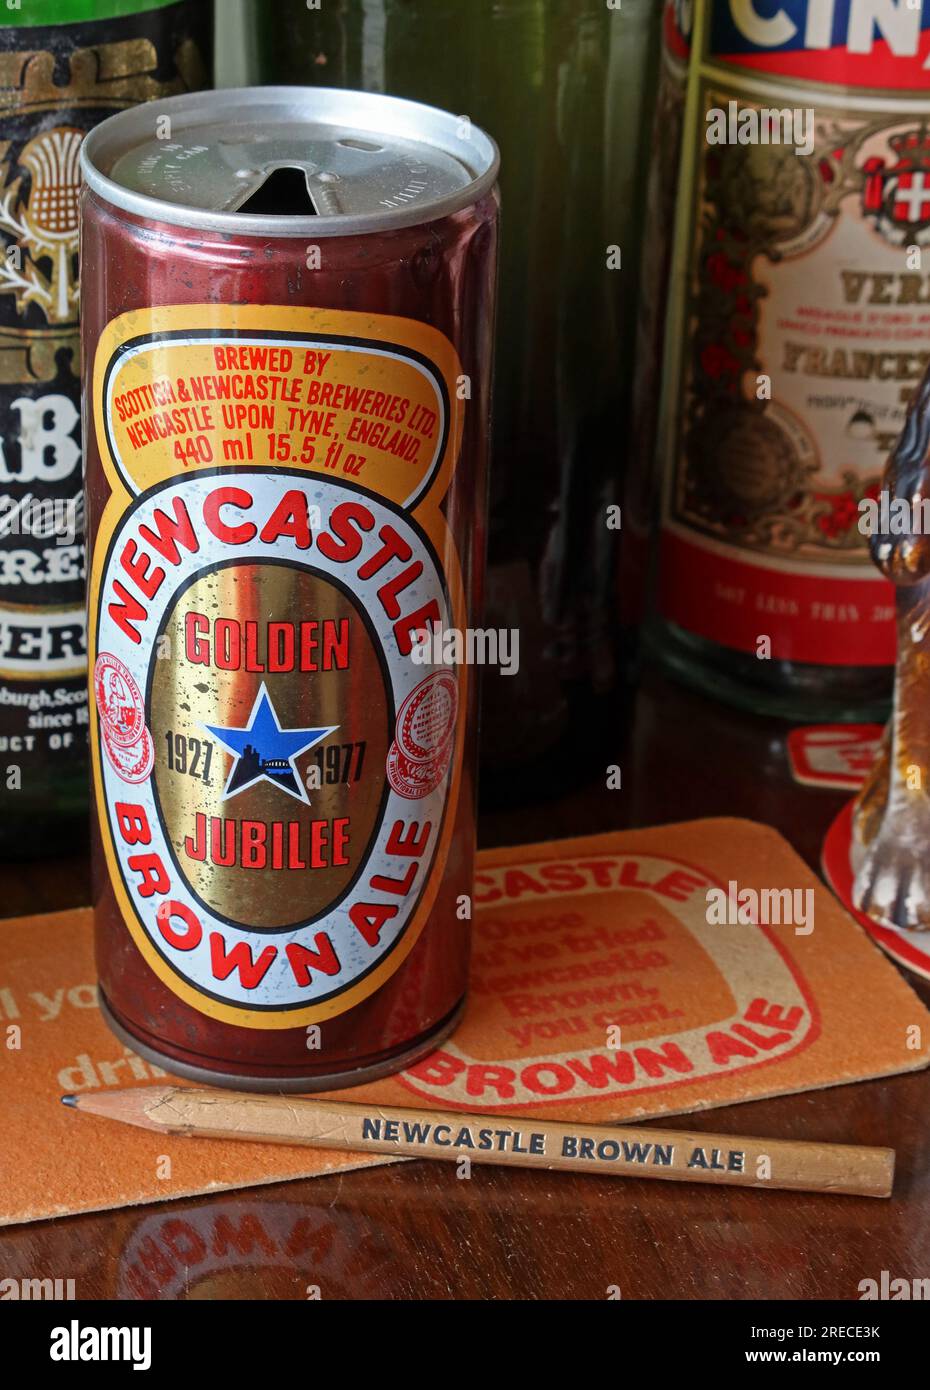 Newcastle Brown Ale, Golden Jubilee can , 1927,1977, with pencil and beer mat Stock Photo